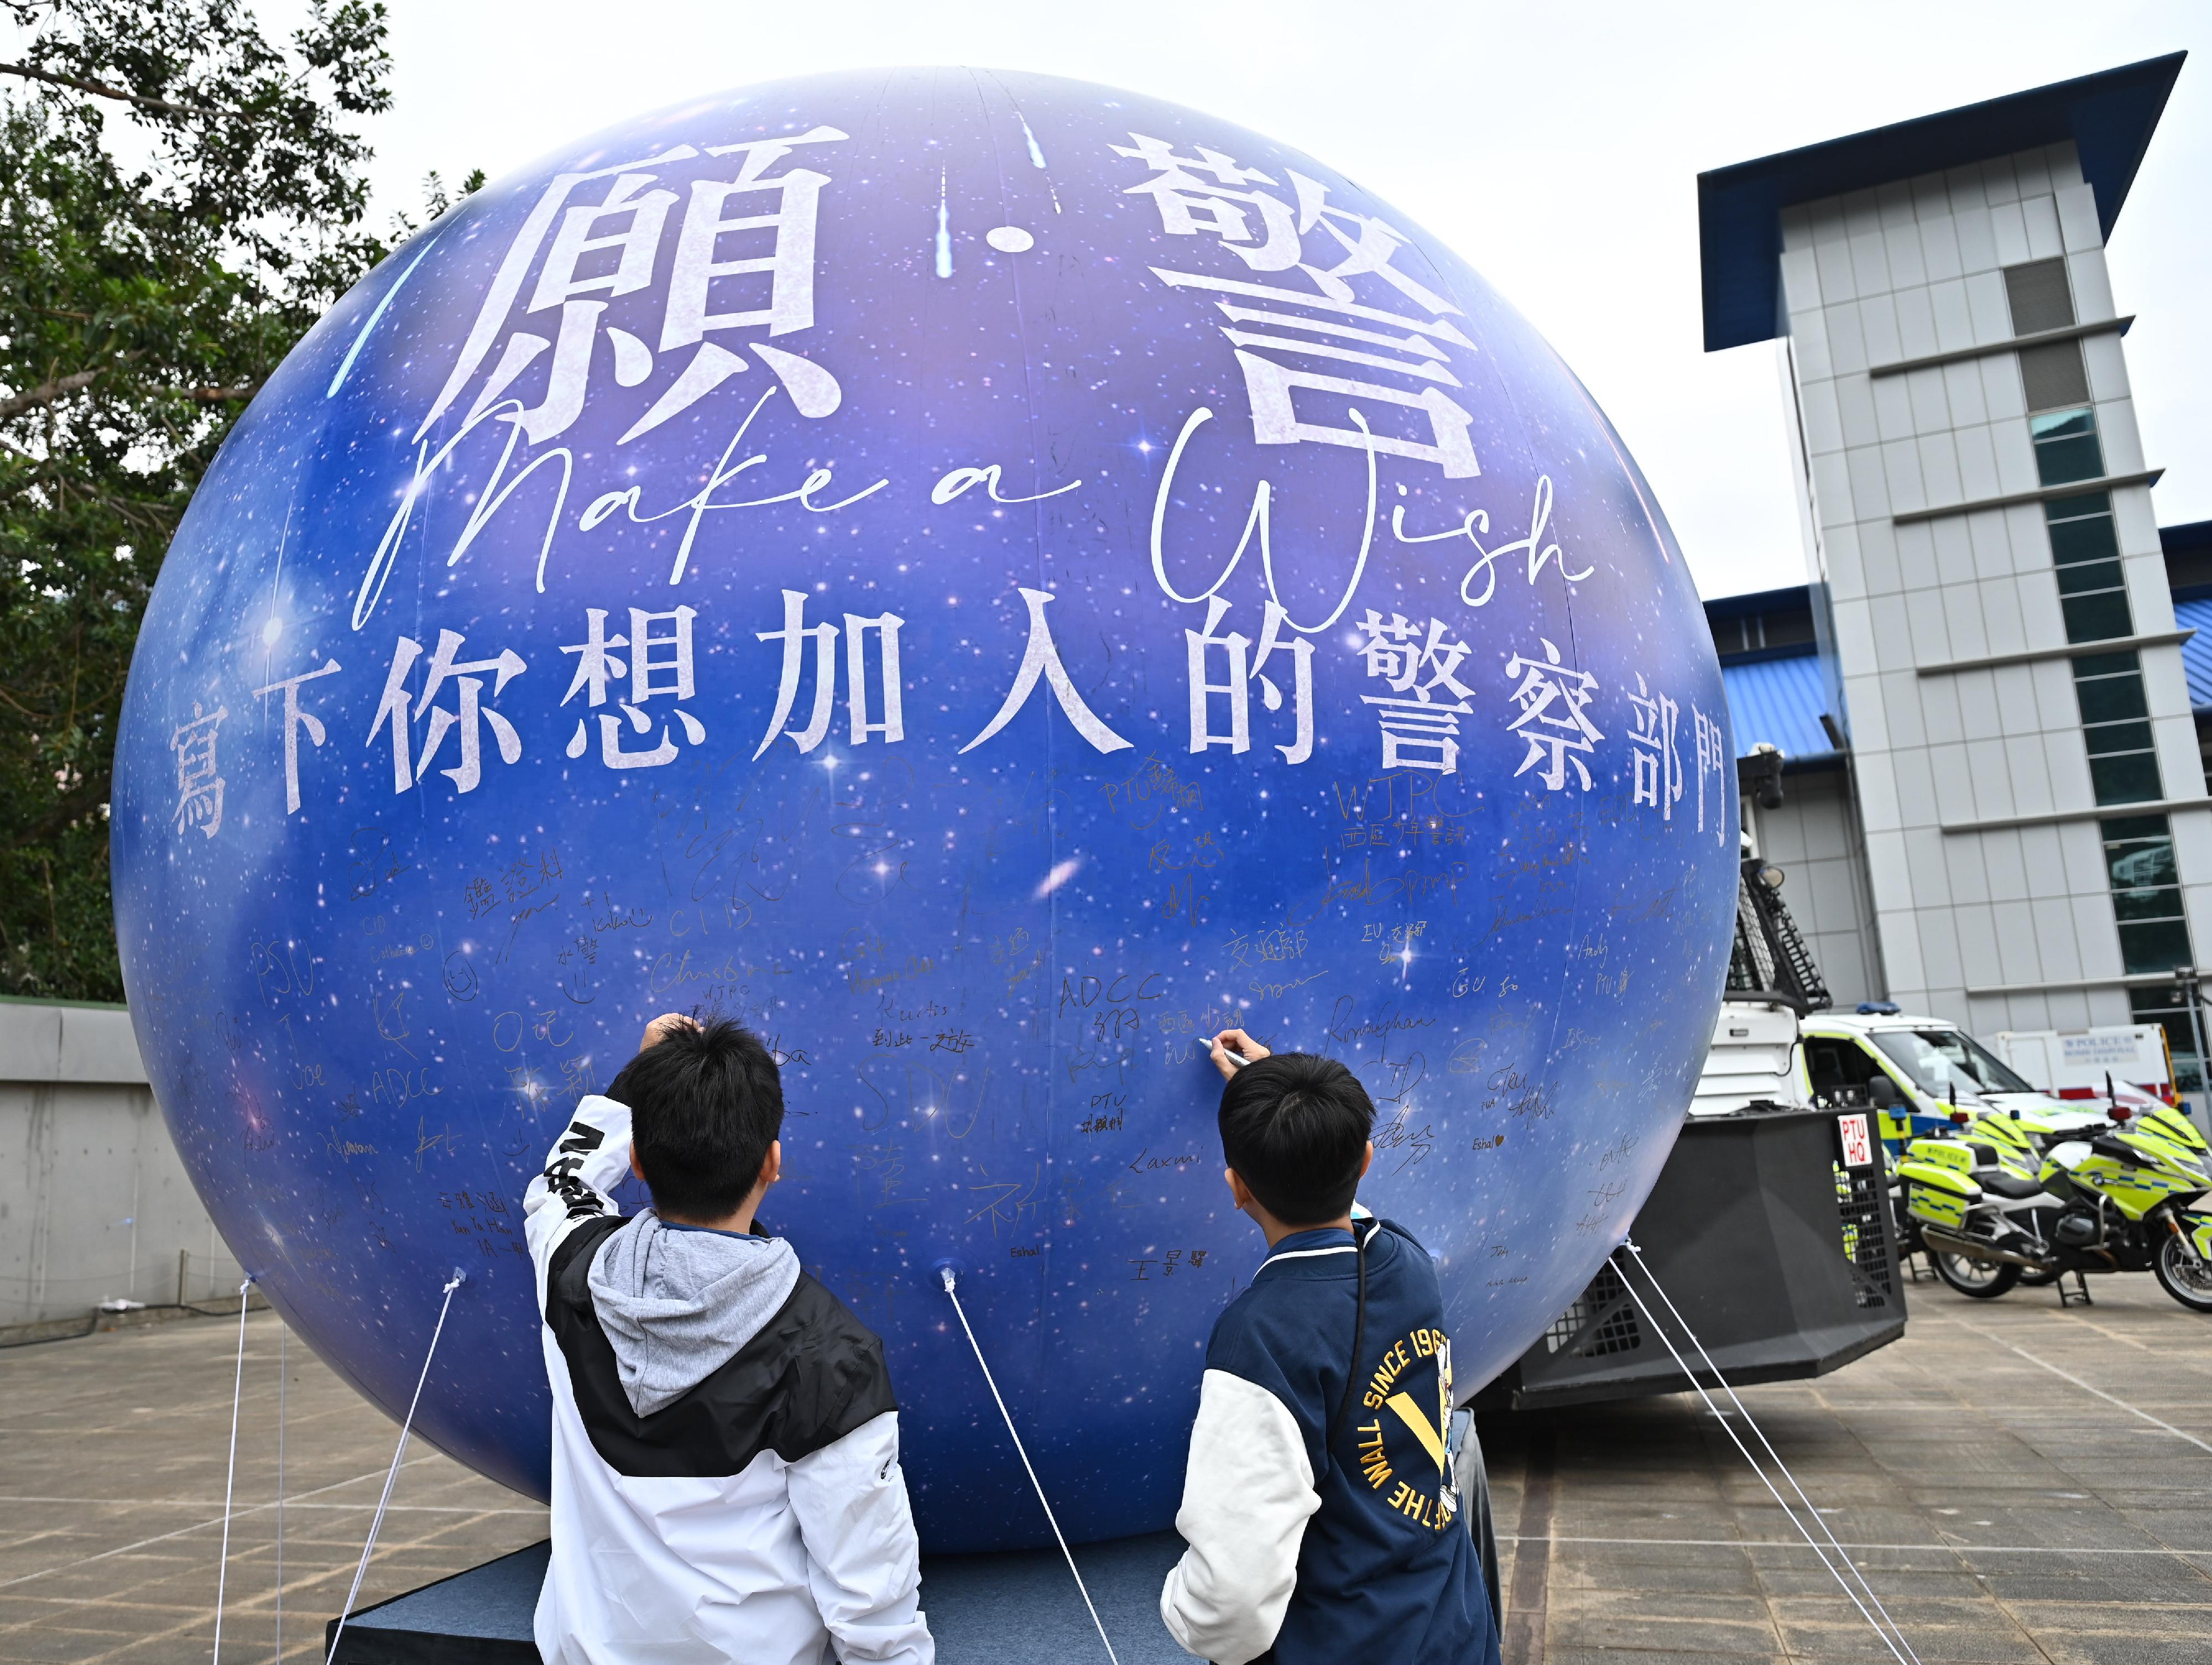 The Hong Kong Police Force today (December 17) organised the Police Recruitment Experience and Assessment Day at the Hong Kong Police College with the theme of "One Team, One Vision". Photo shows participants writing down the police unit they wished to join on the giant wish balloon at the venue.